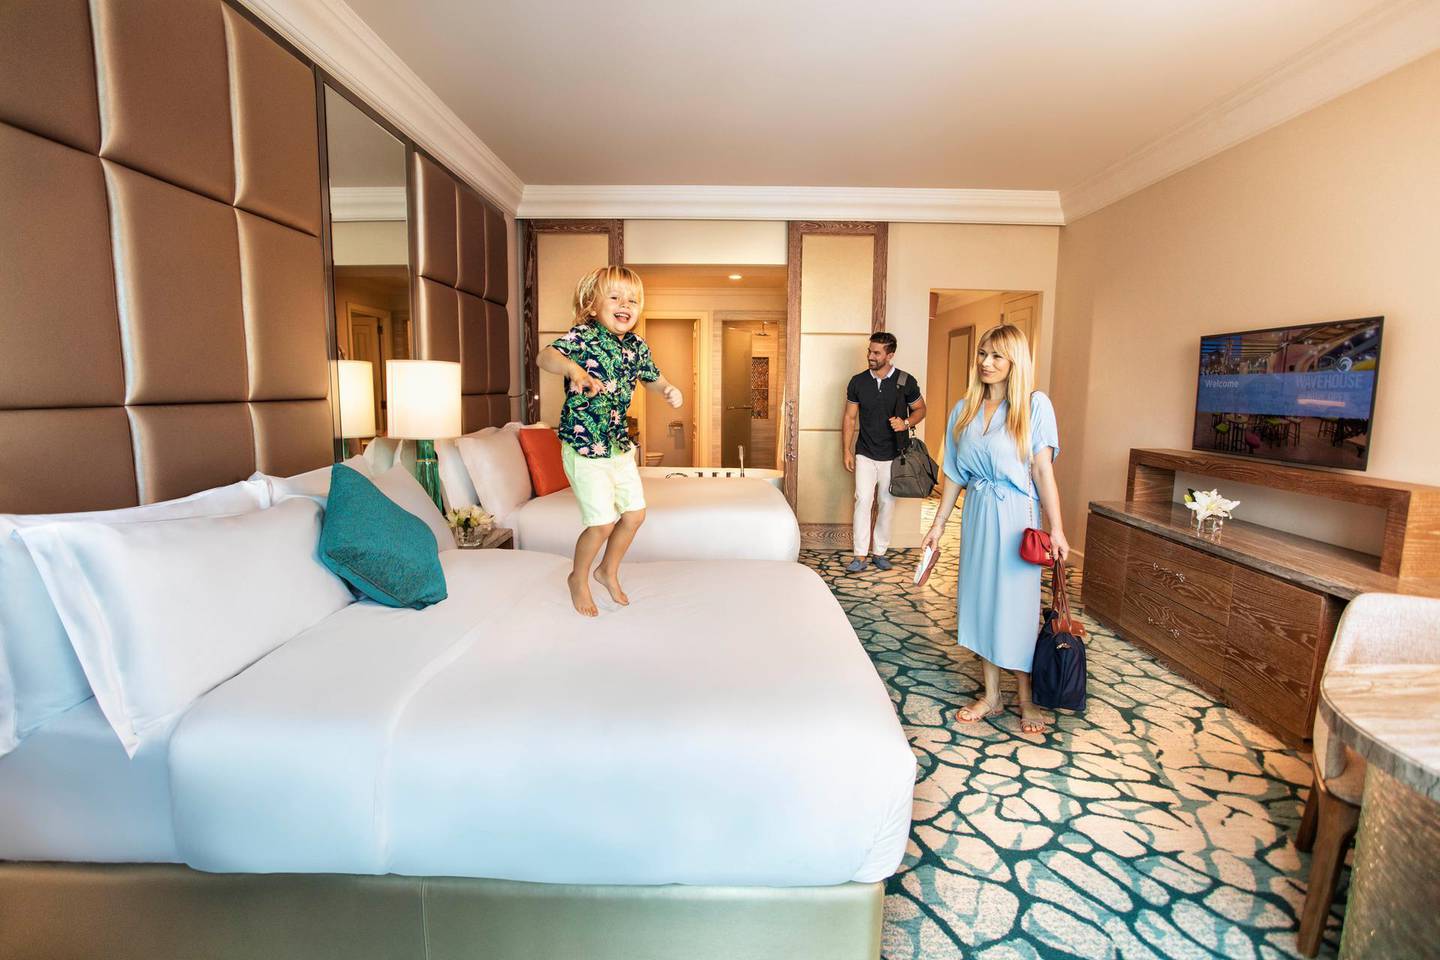 International travellers staying at Atlantis, The Palm for more than five nights can get a free Covid-19 test but UAE residents staying the same length of time will have to pay for testing. Courtesy Atlantis, The Palm, Dubai